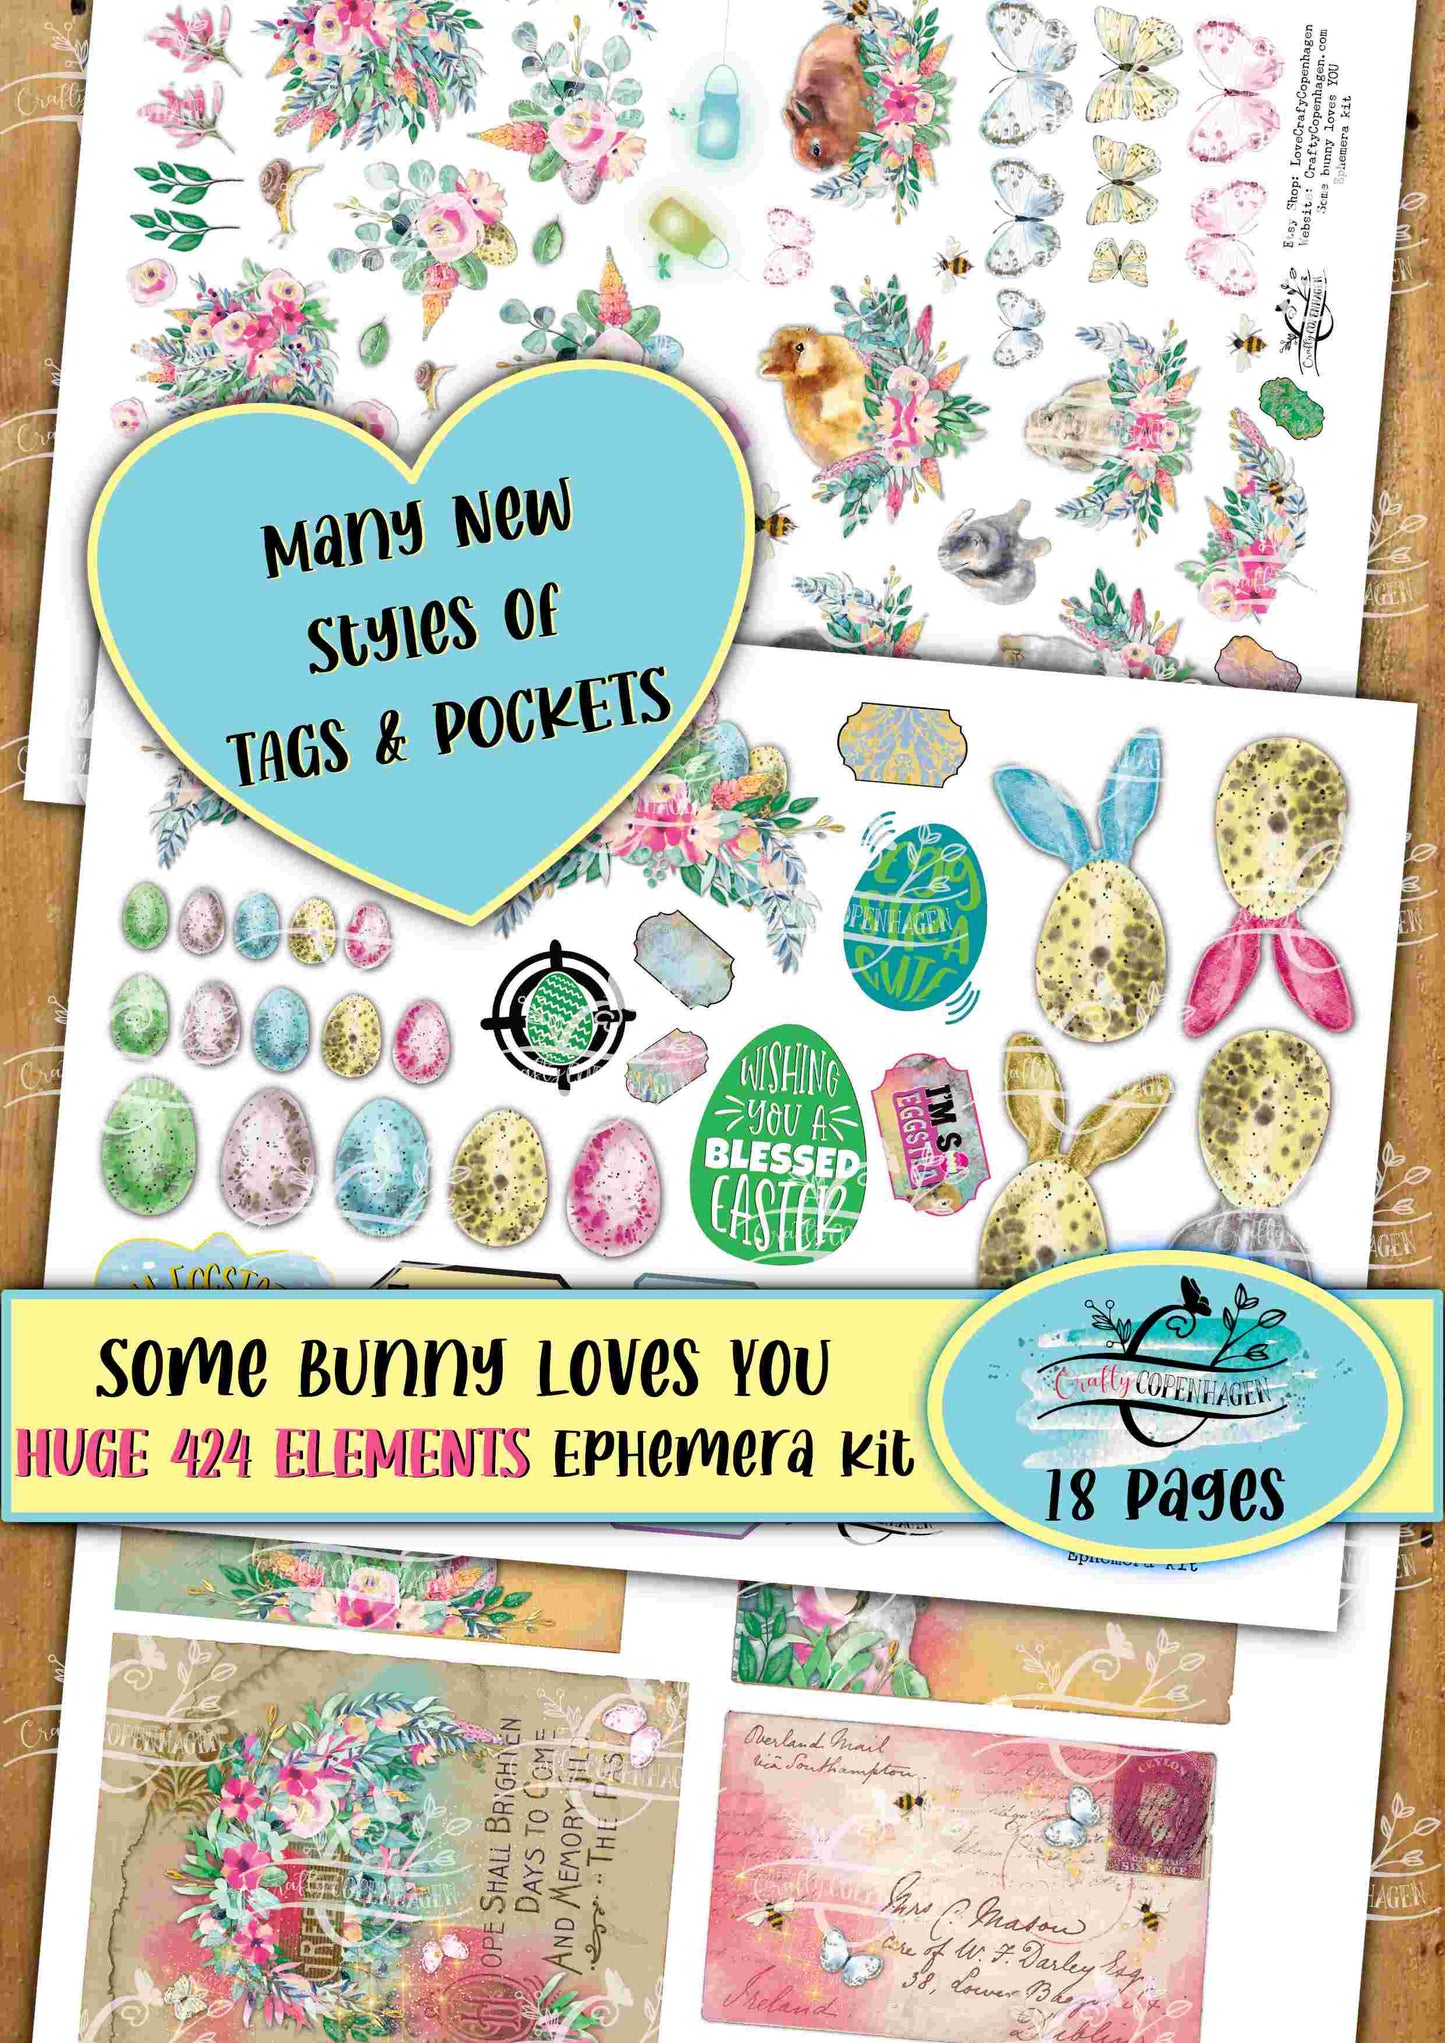 Some Bunny Loves YOU Ephemera Kit - HUGE 424 Elements on 18 Pages for Instant Download & Print, Spring, Easter, Yellow, Green, Floral